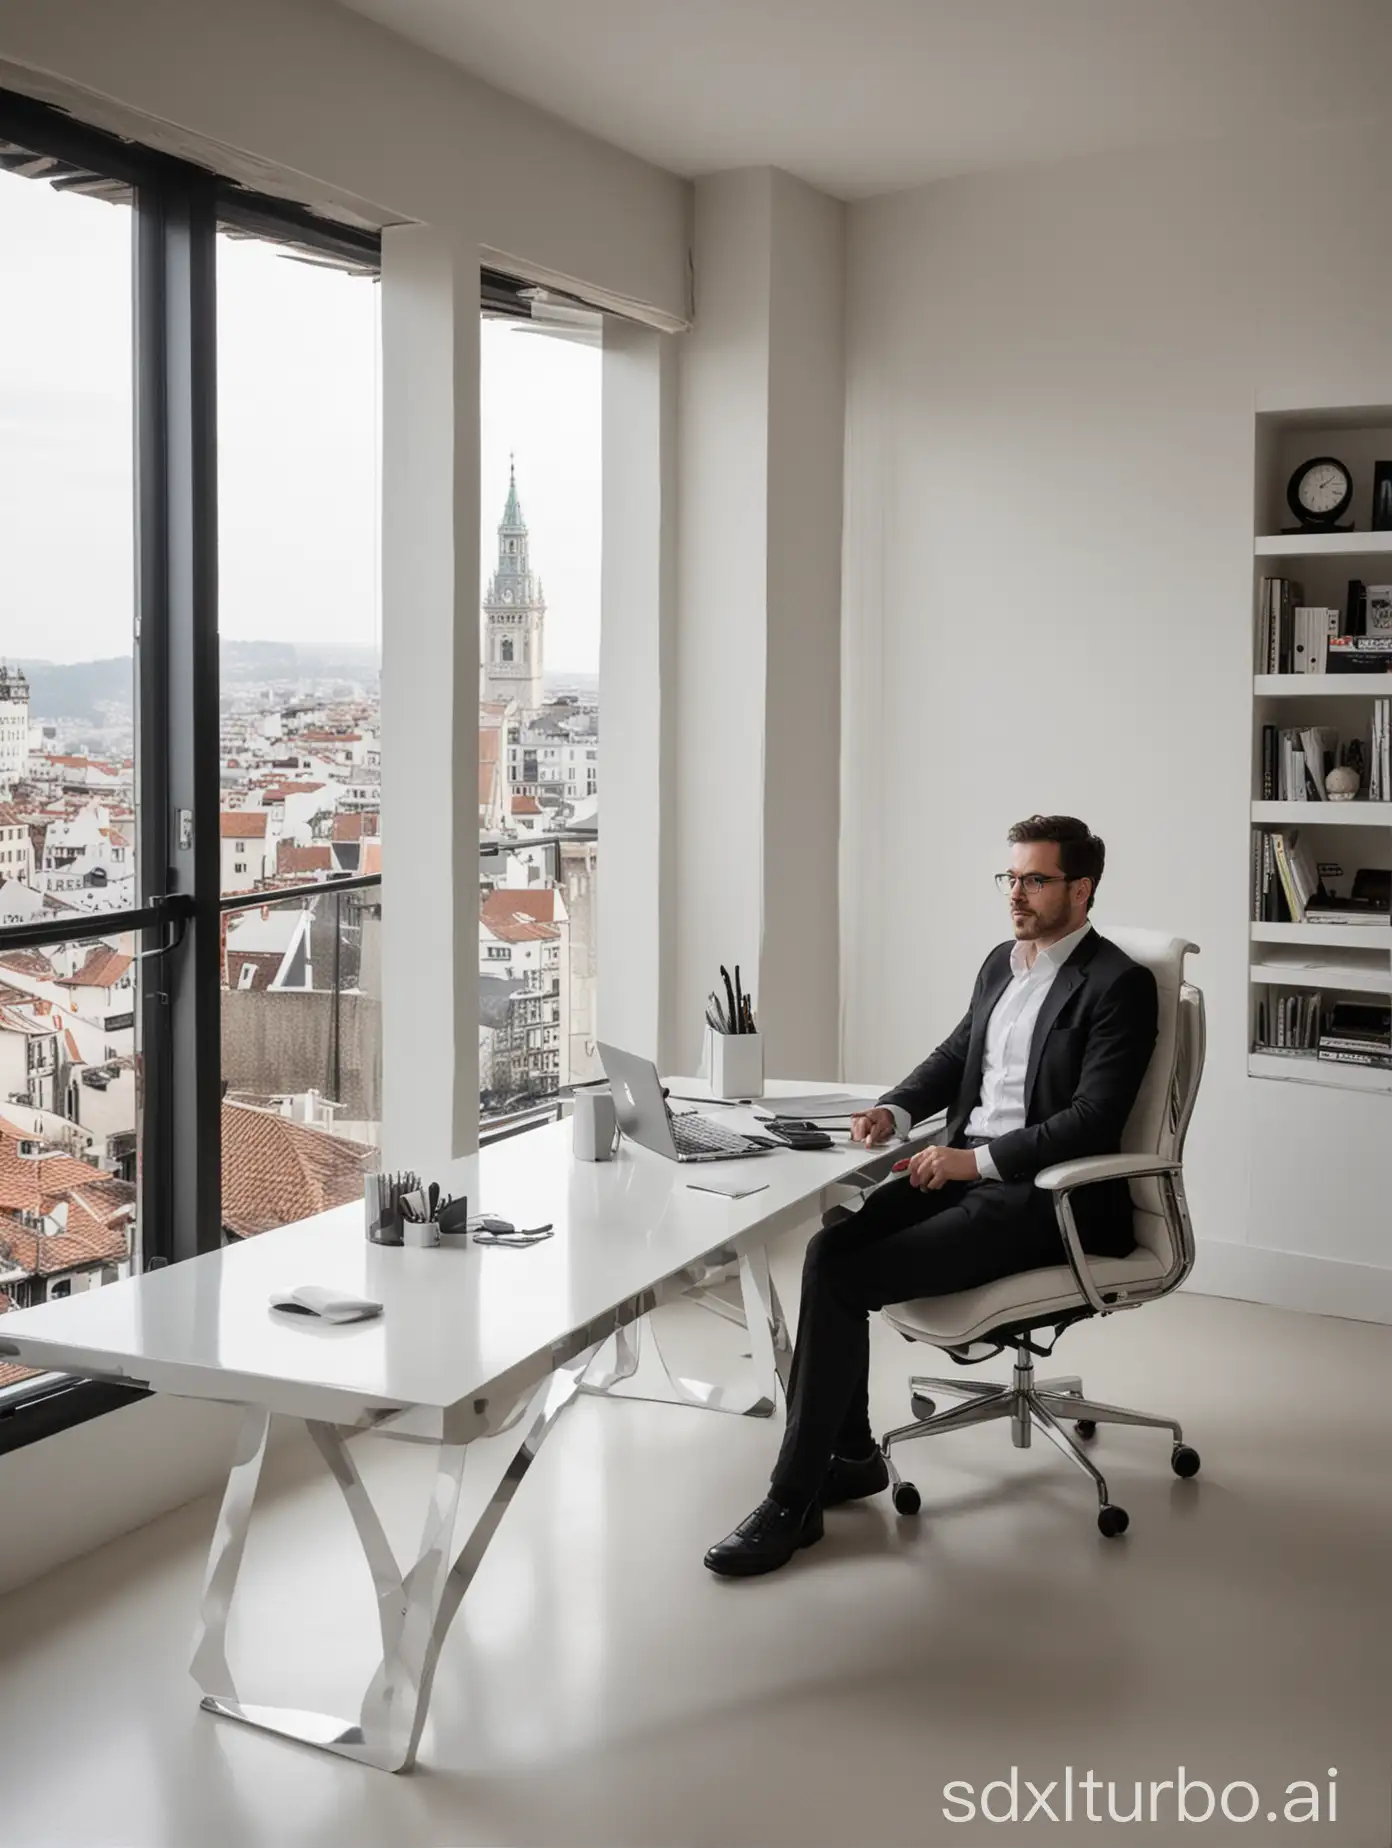 man-Architect-so beautiful office in the tower-modern table design-gentle man with black and white clothes-imac